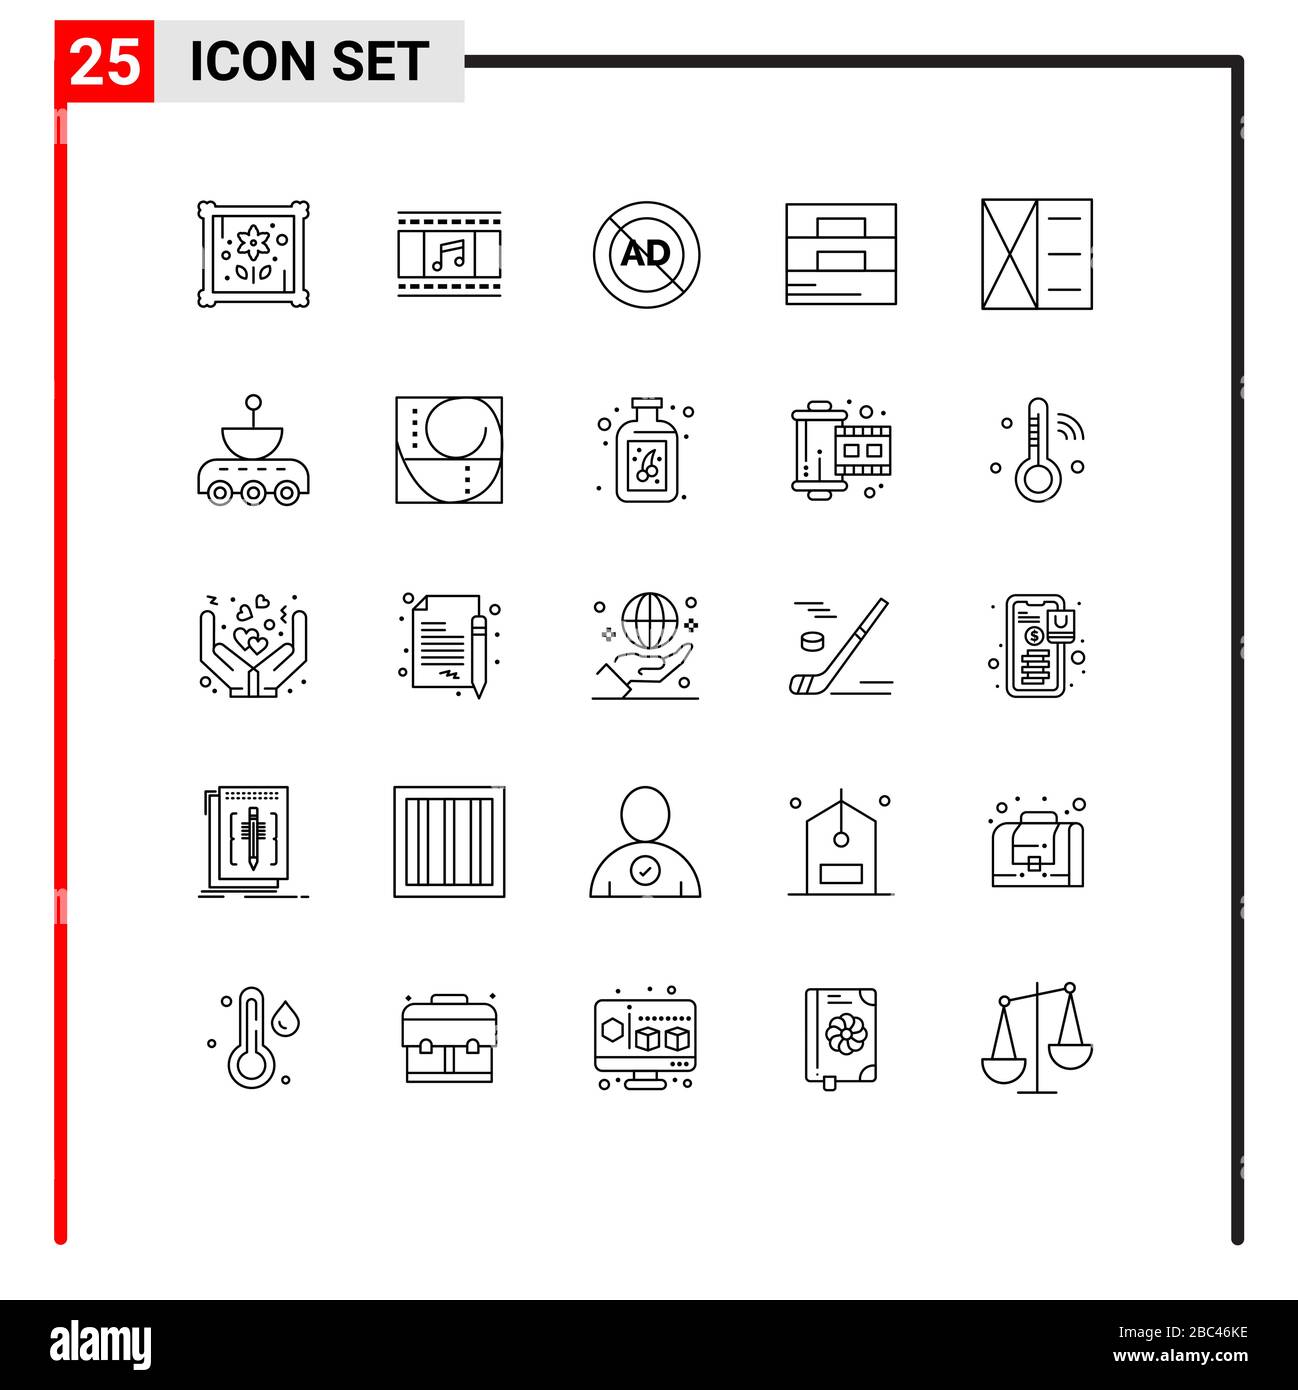 Modern Set of 25 Lines and symbols such as satellite, wallet, ad block, man, accessories Editable Vector Design Elements Stock Vector